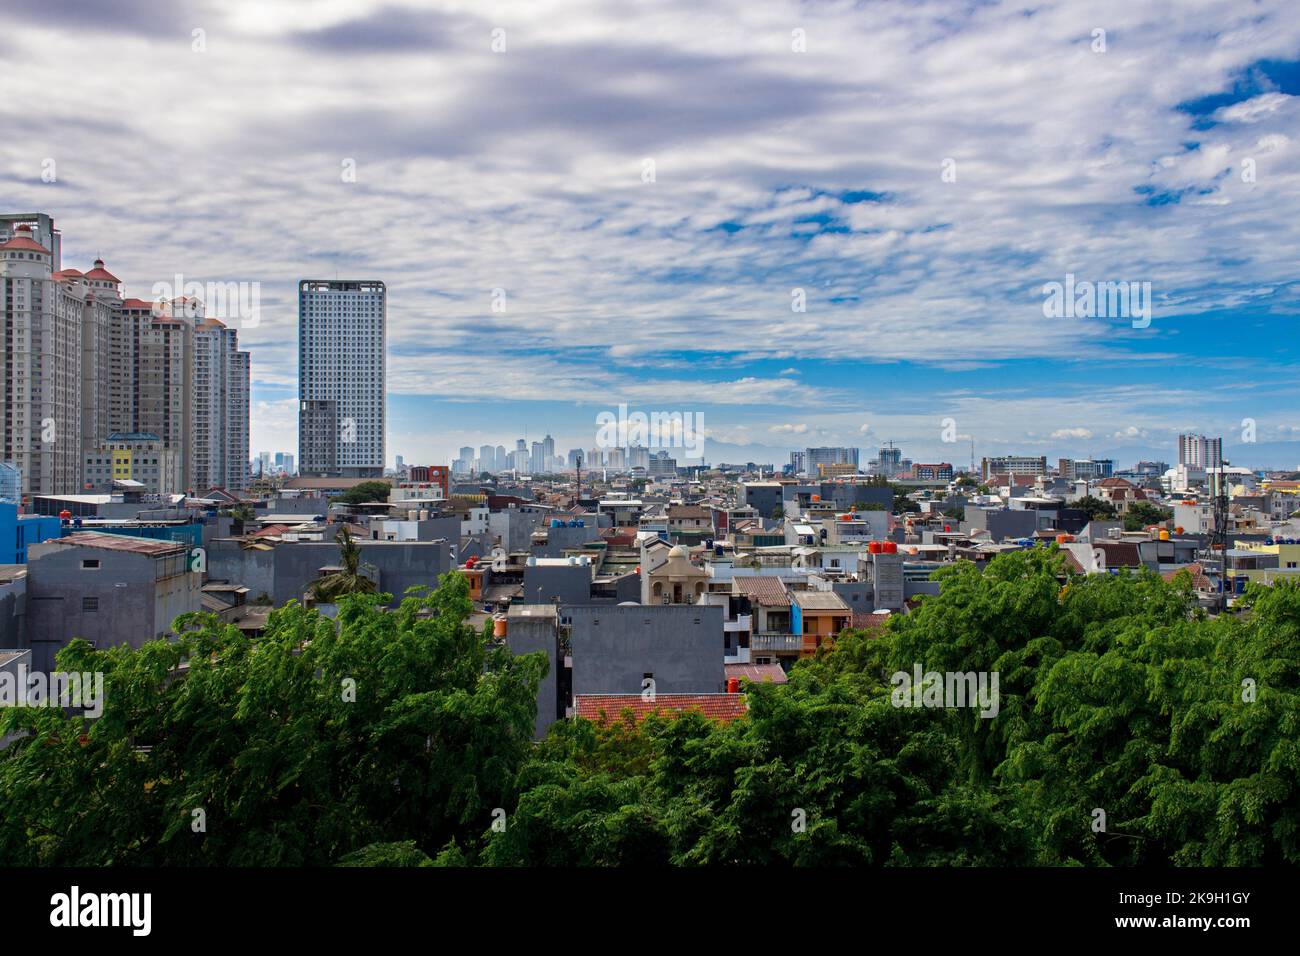 summer crowded city landscape Stock Photo